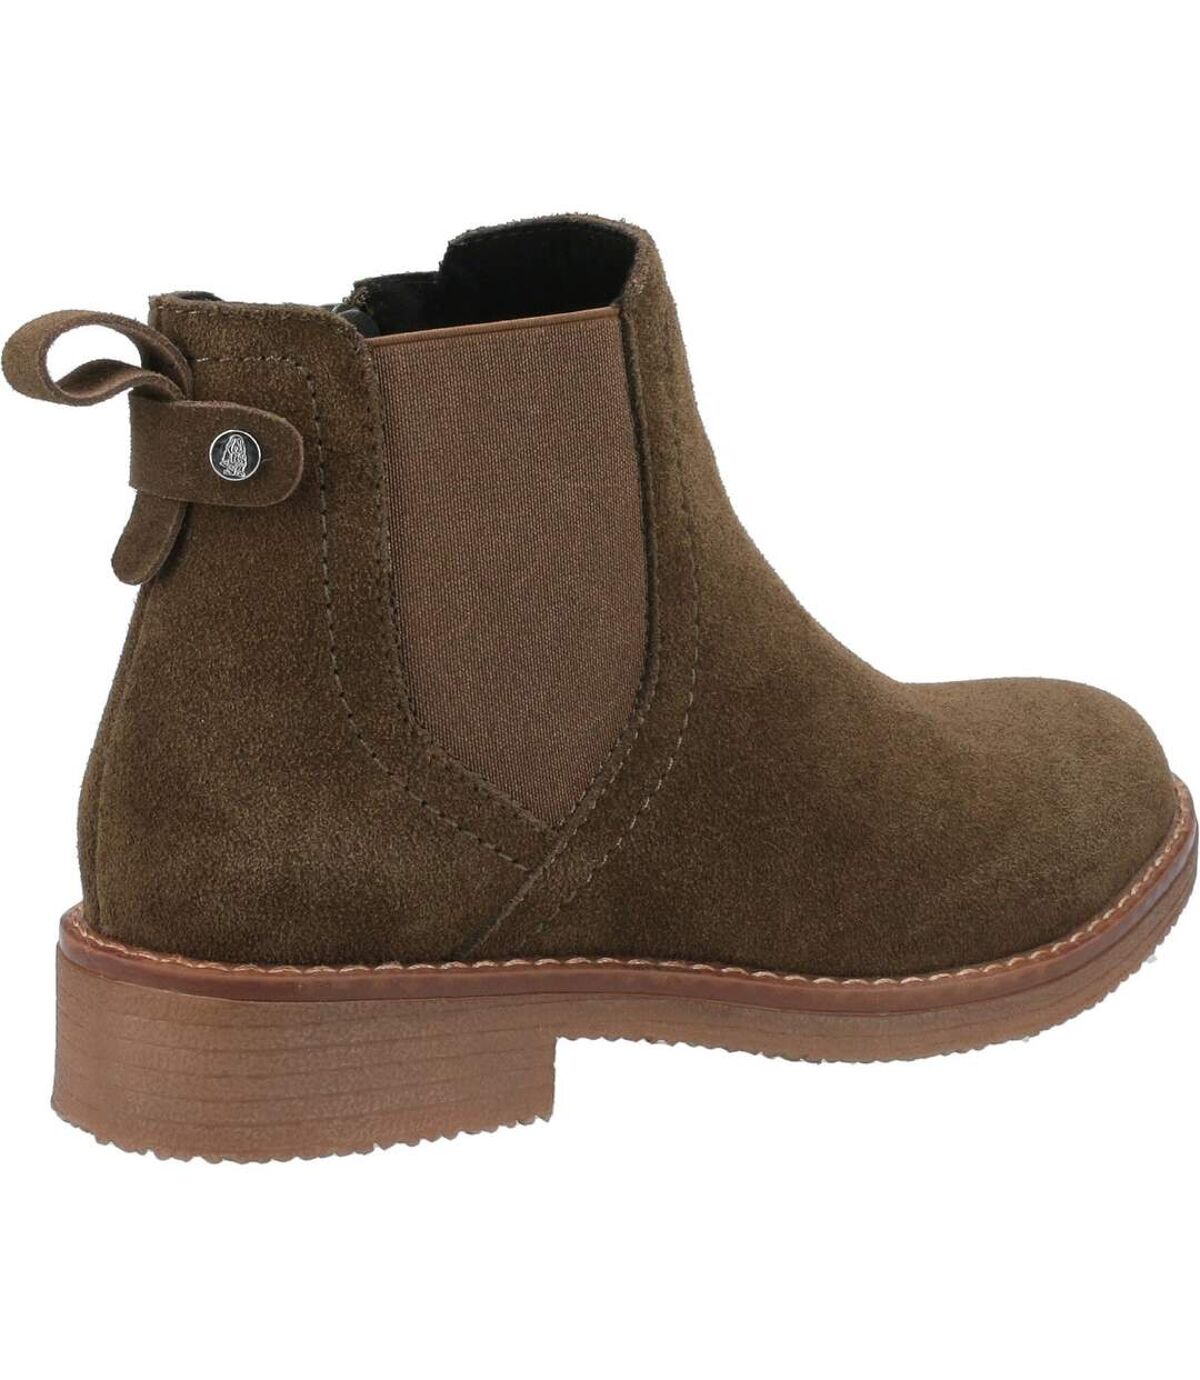 Hush Puppies Womens/Ladies Maddy Suede Ankle Boots (Khaki) - UTFS7392